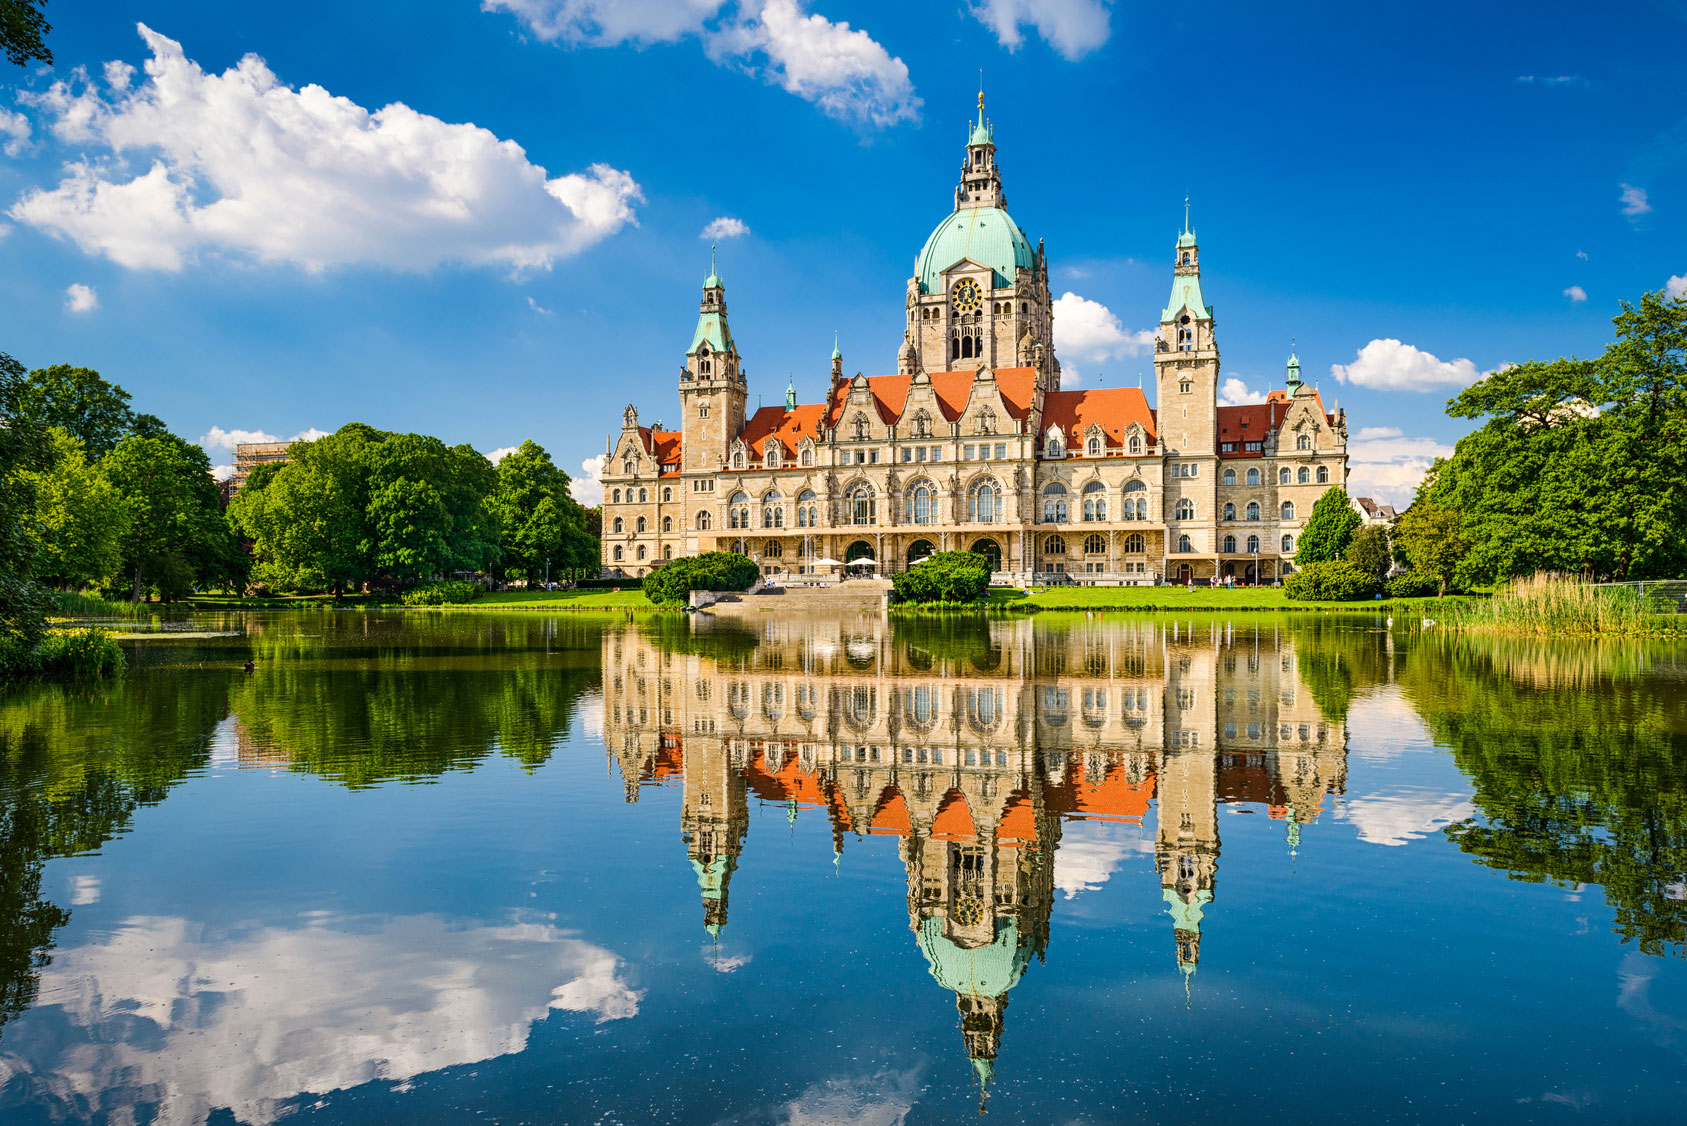 City hall of Hanover and its reflection on the water of a lake